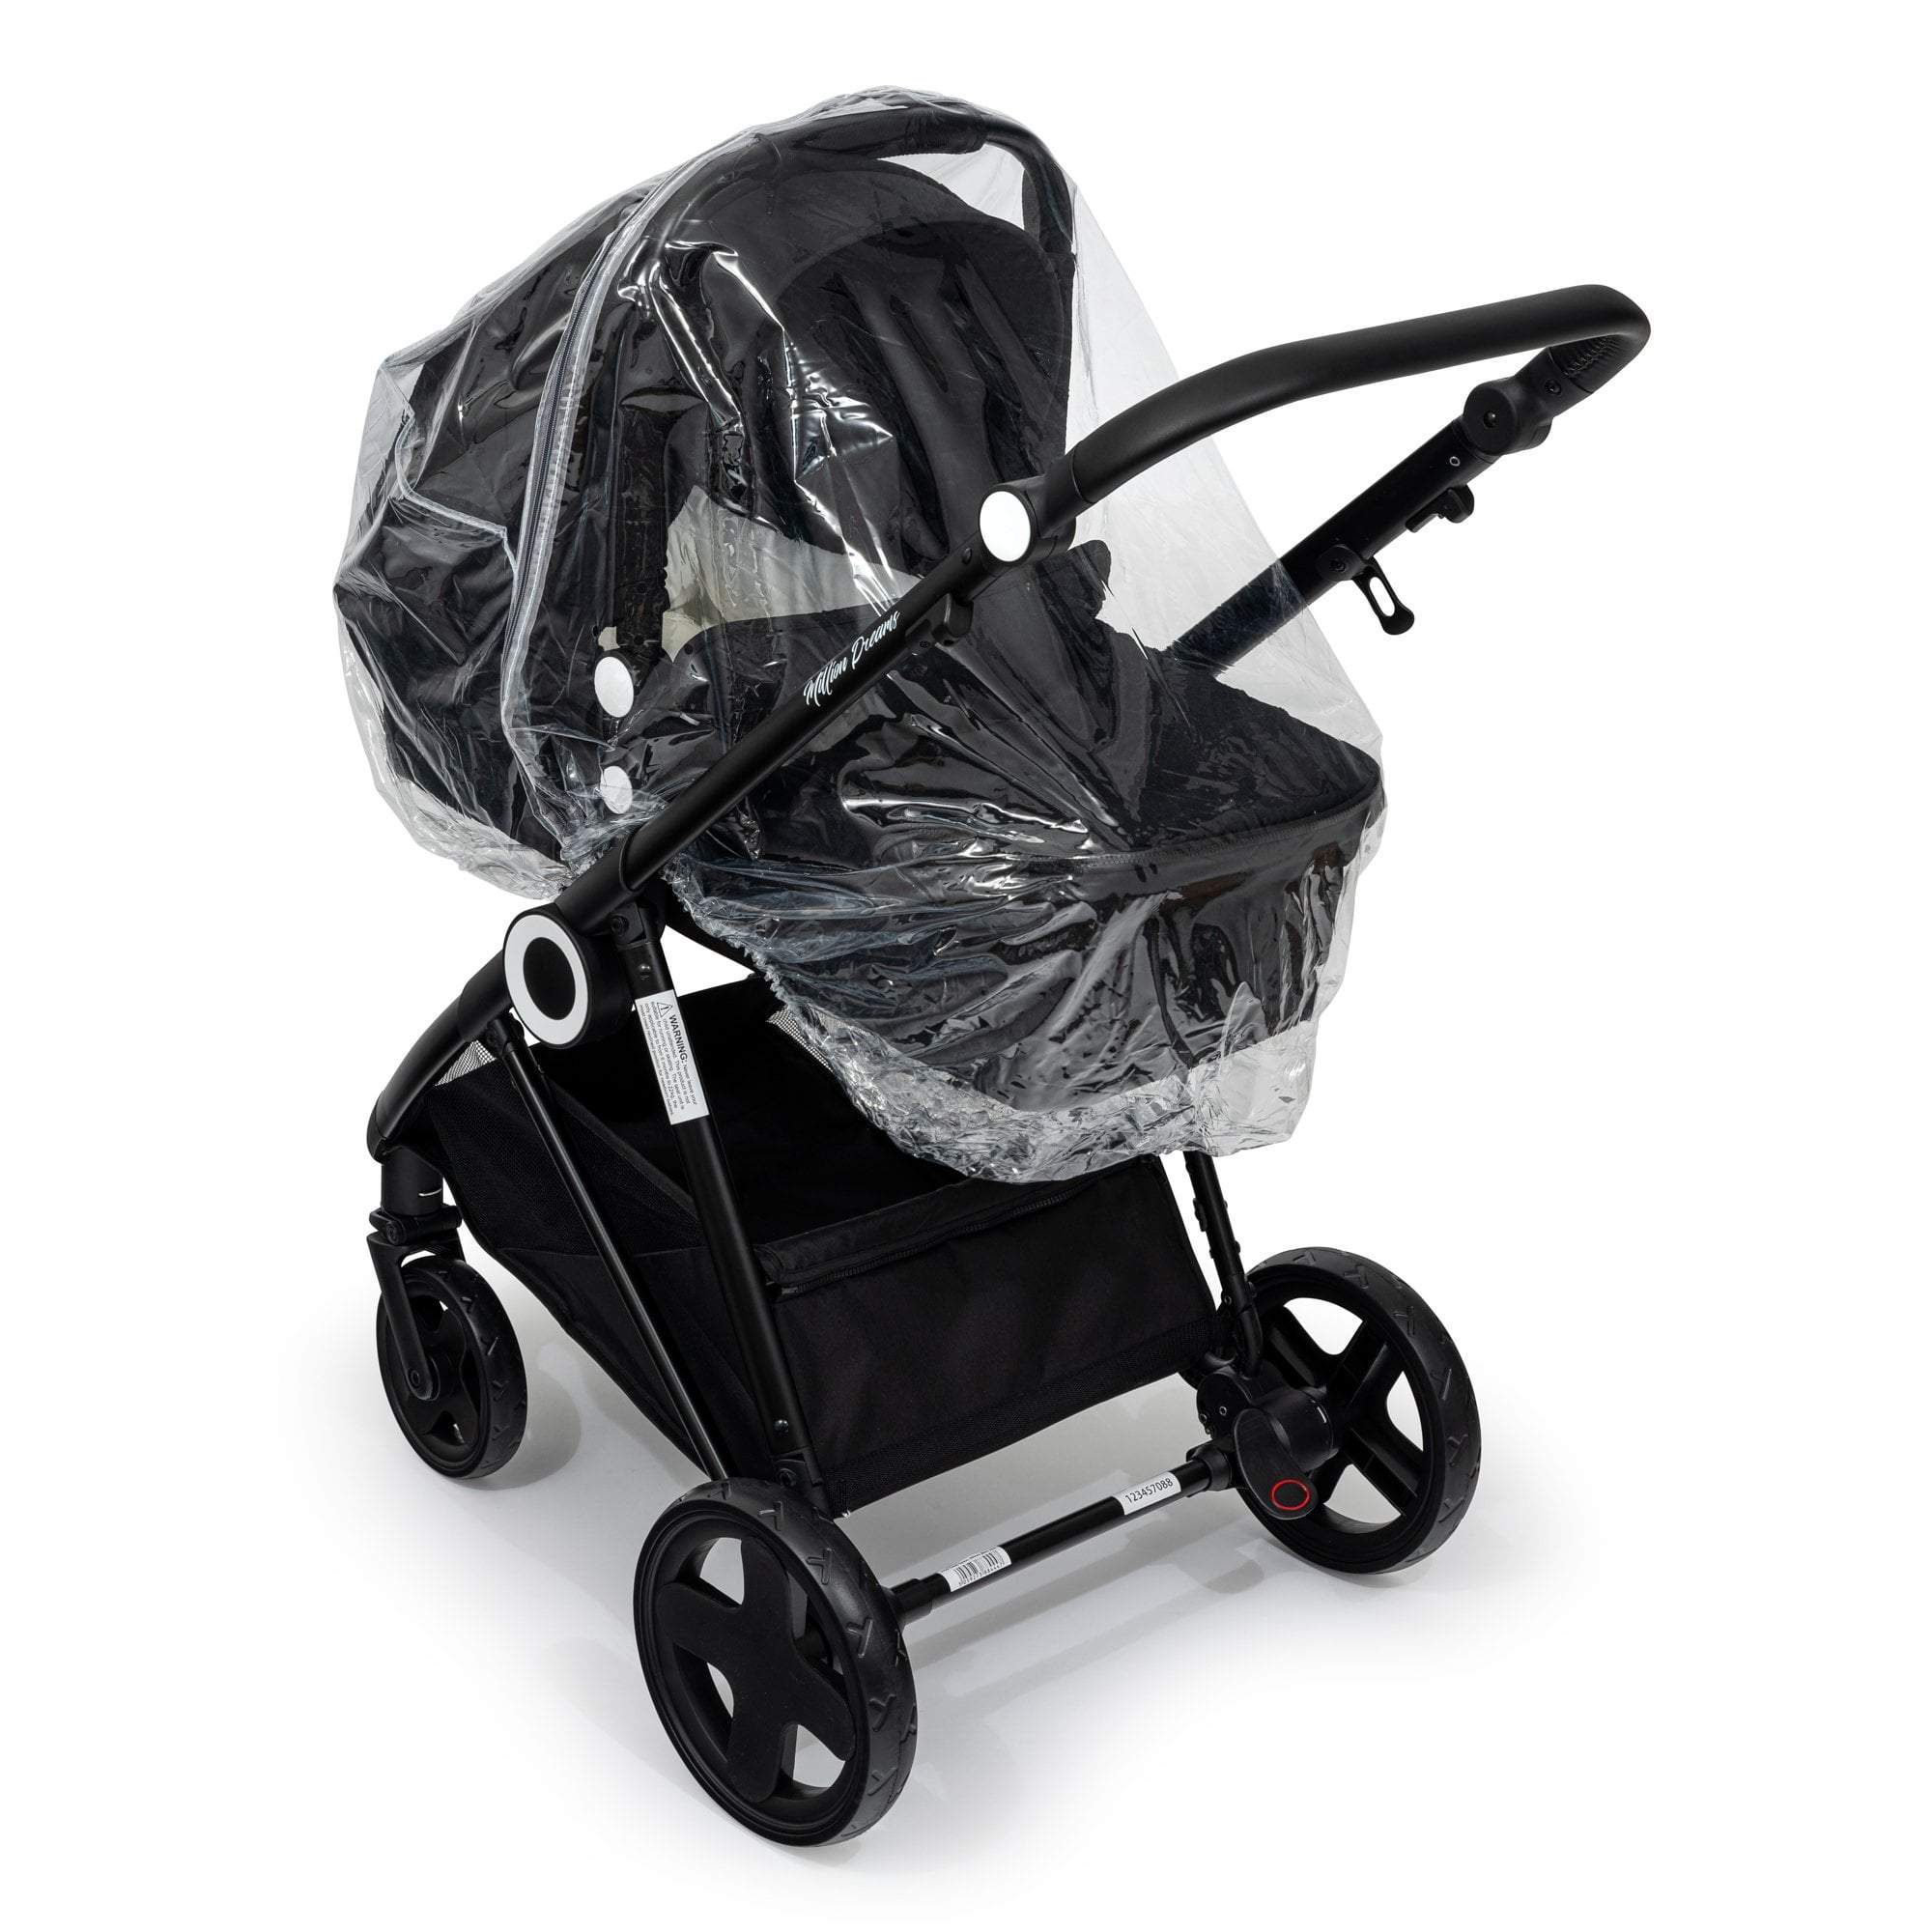 Carrycot Raincover Compatible With Combi - Fits All Models - For Your Little One